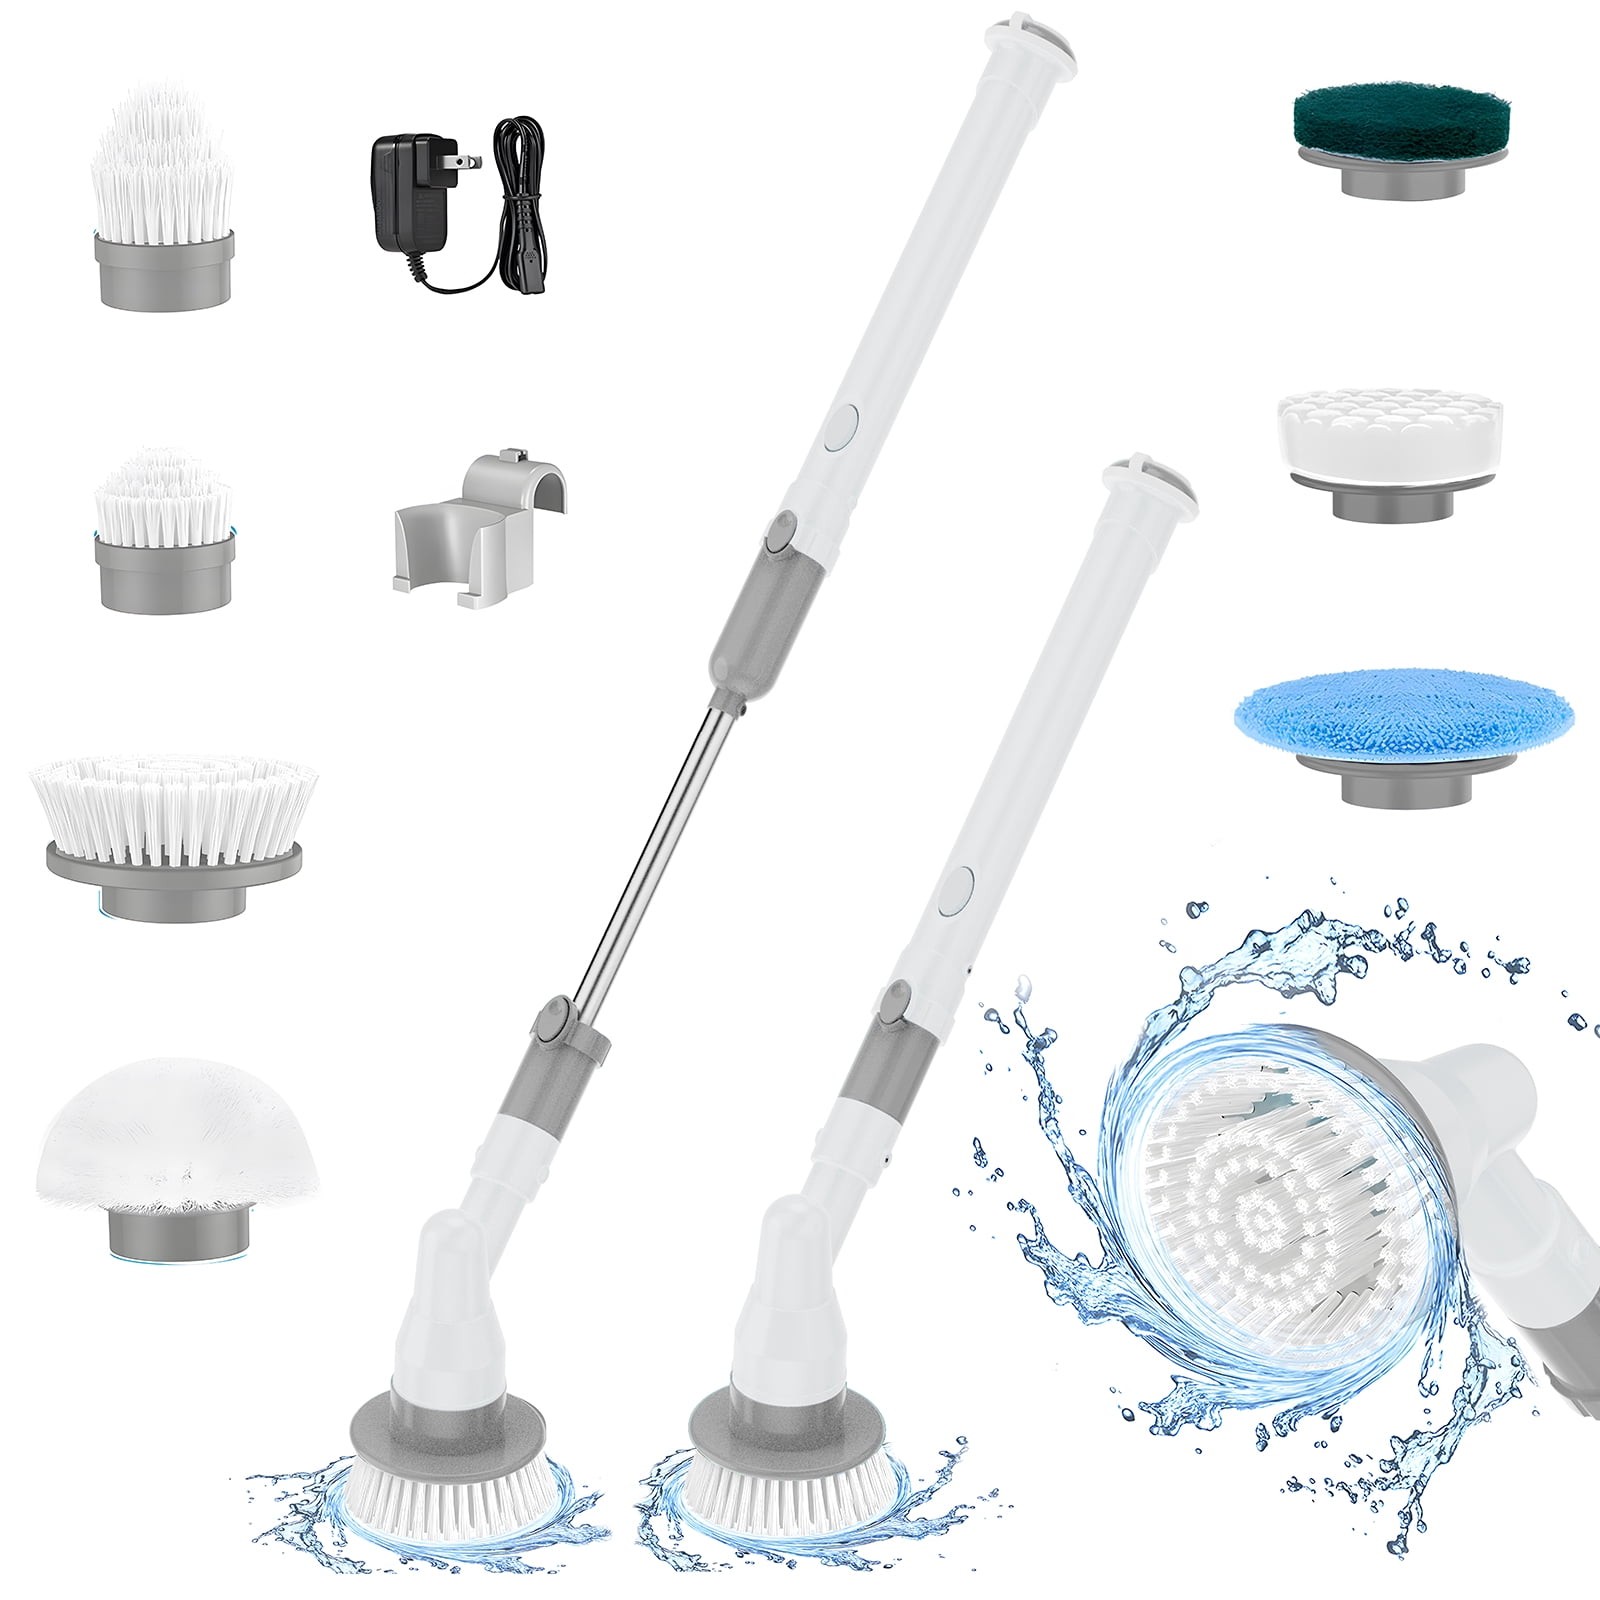 Finelien Electric Spin Scrubber Cordless Power Cleaning Brush Shower  Scrubber for Bathroom Floor 